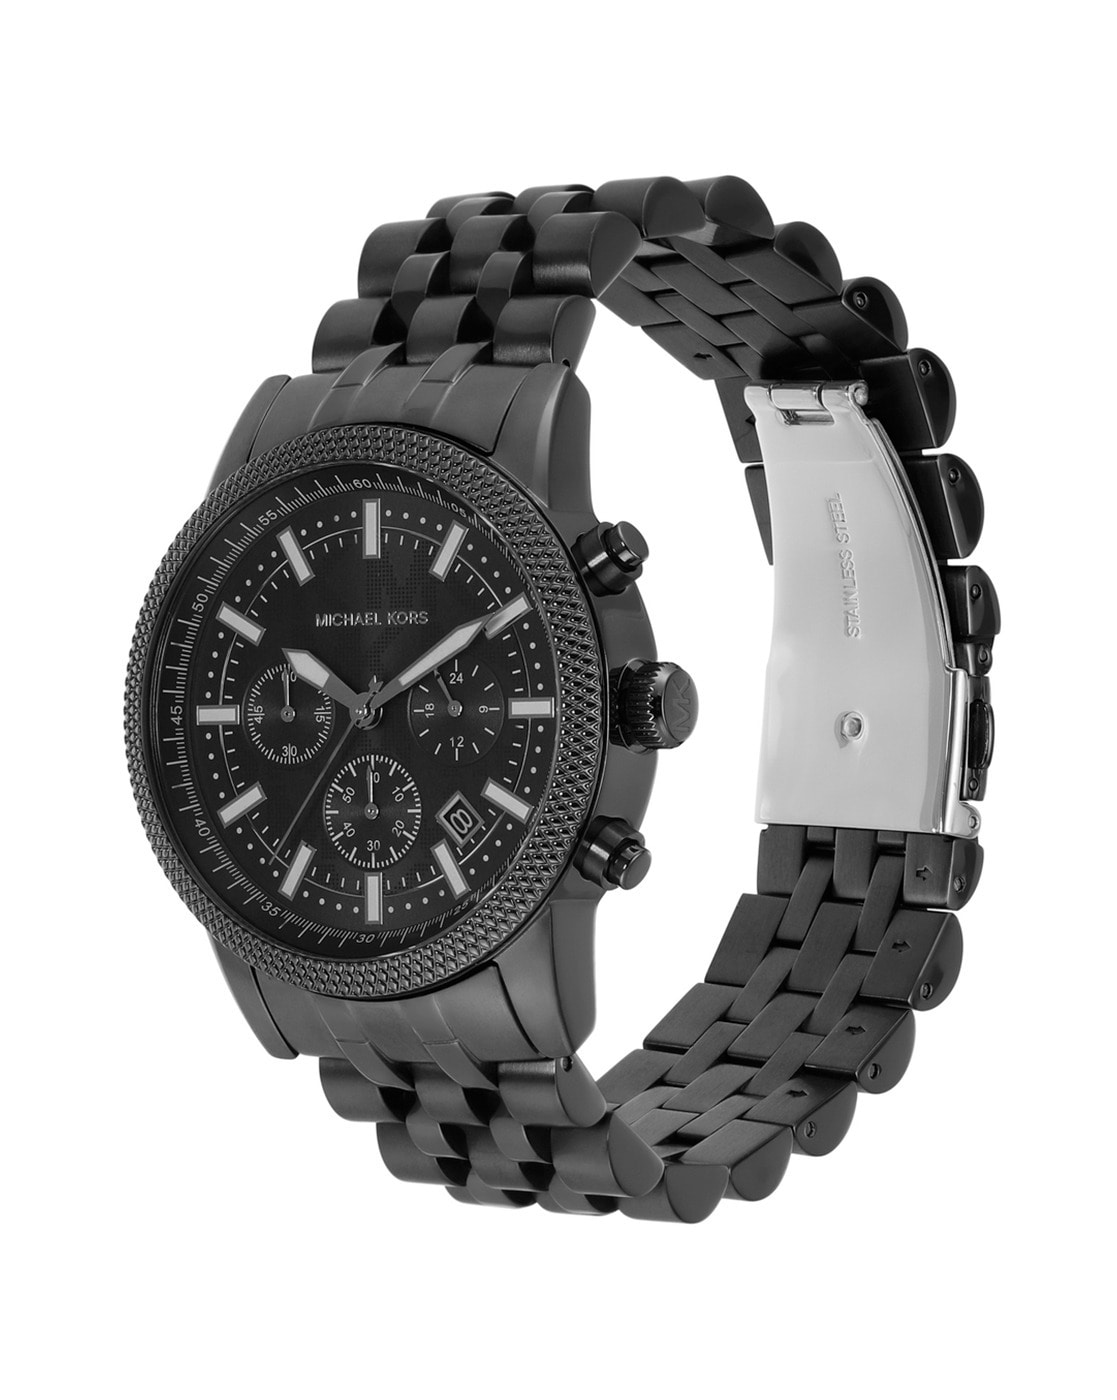 Watches Women Black Kors Michael by Online Buy for